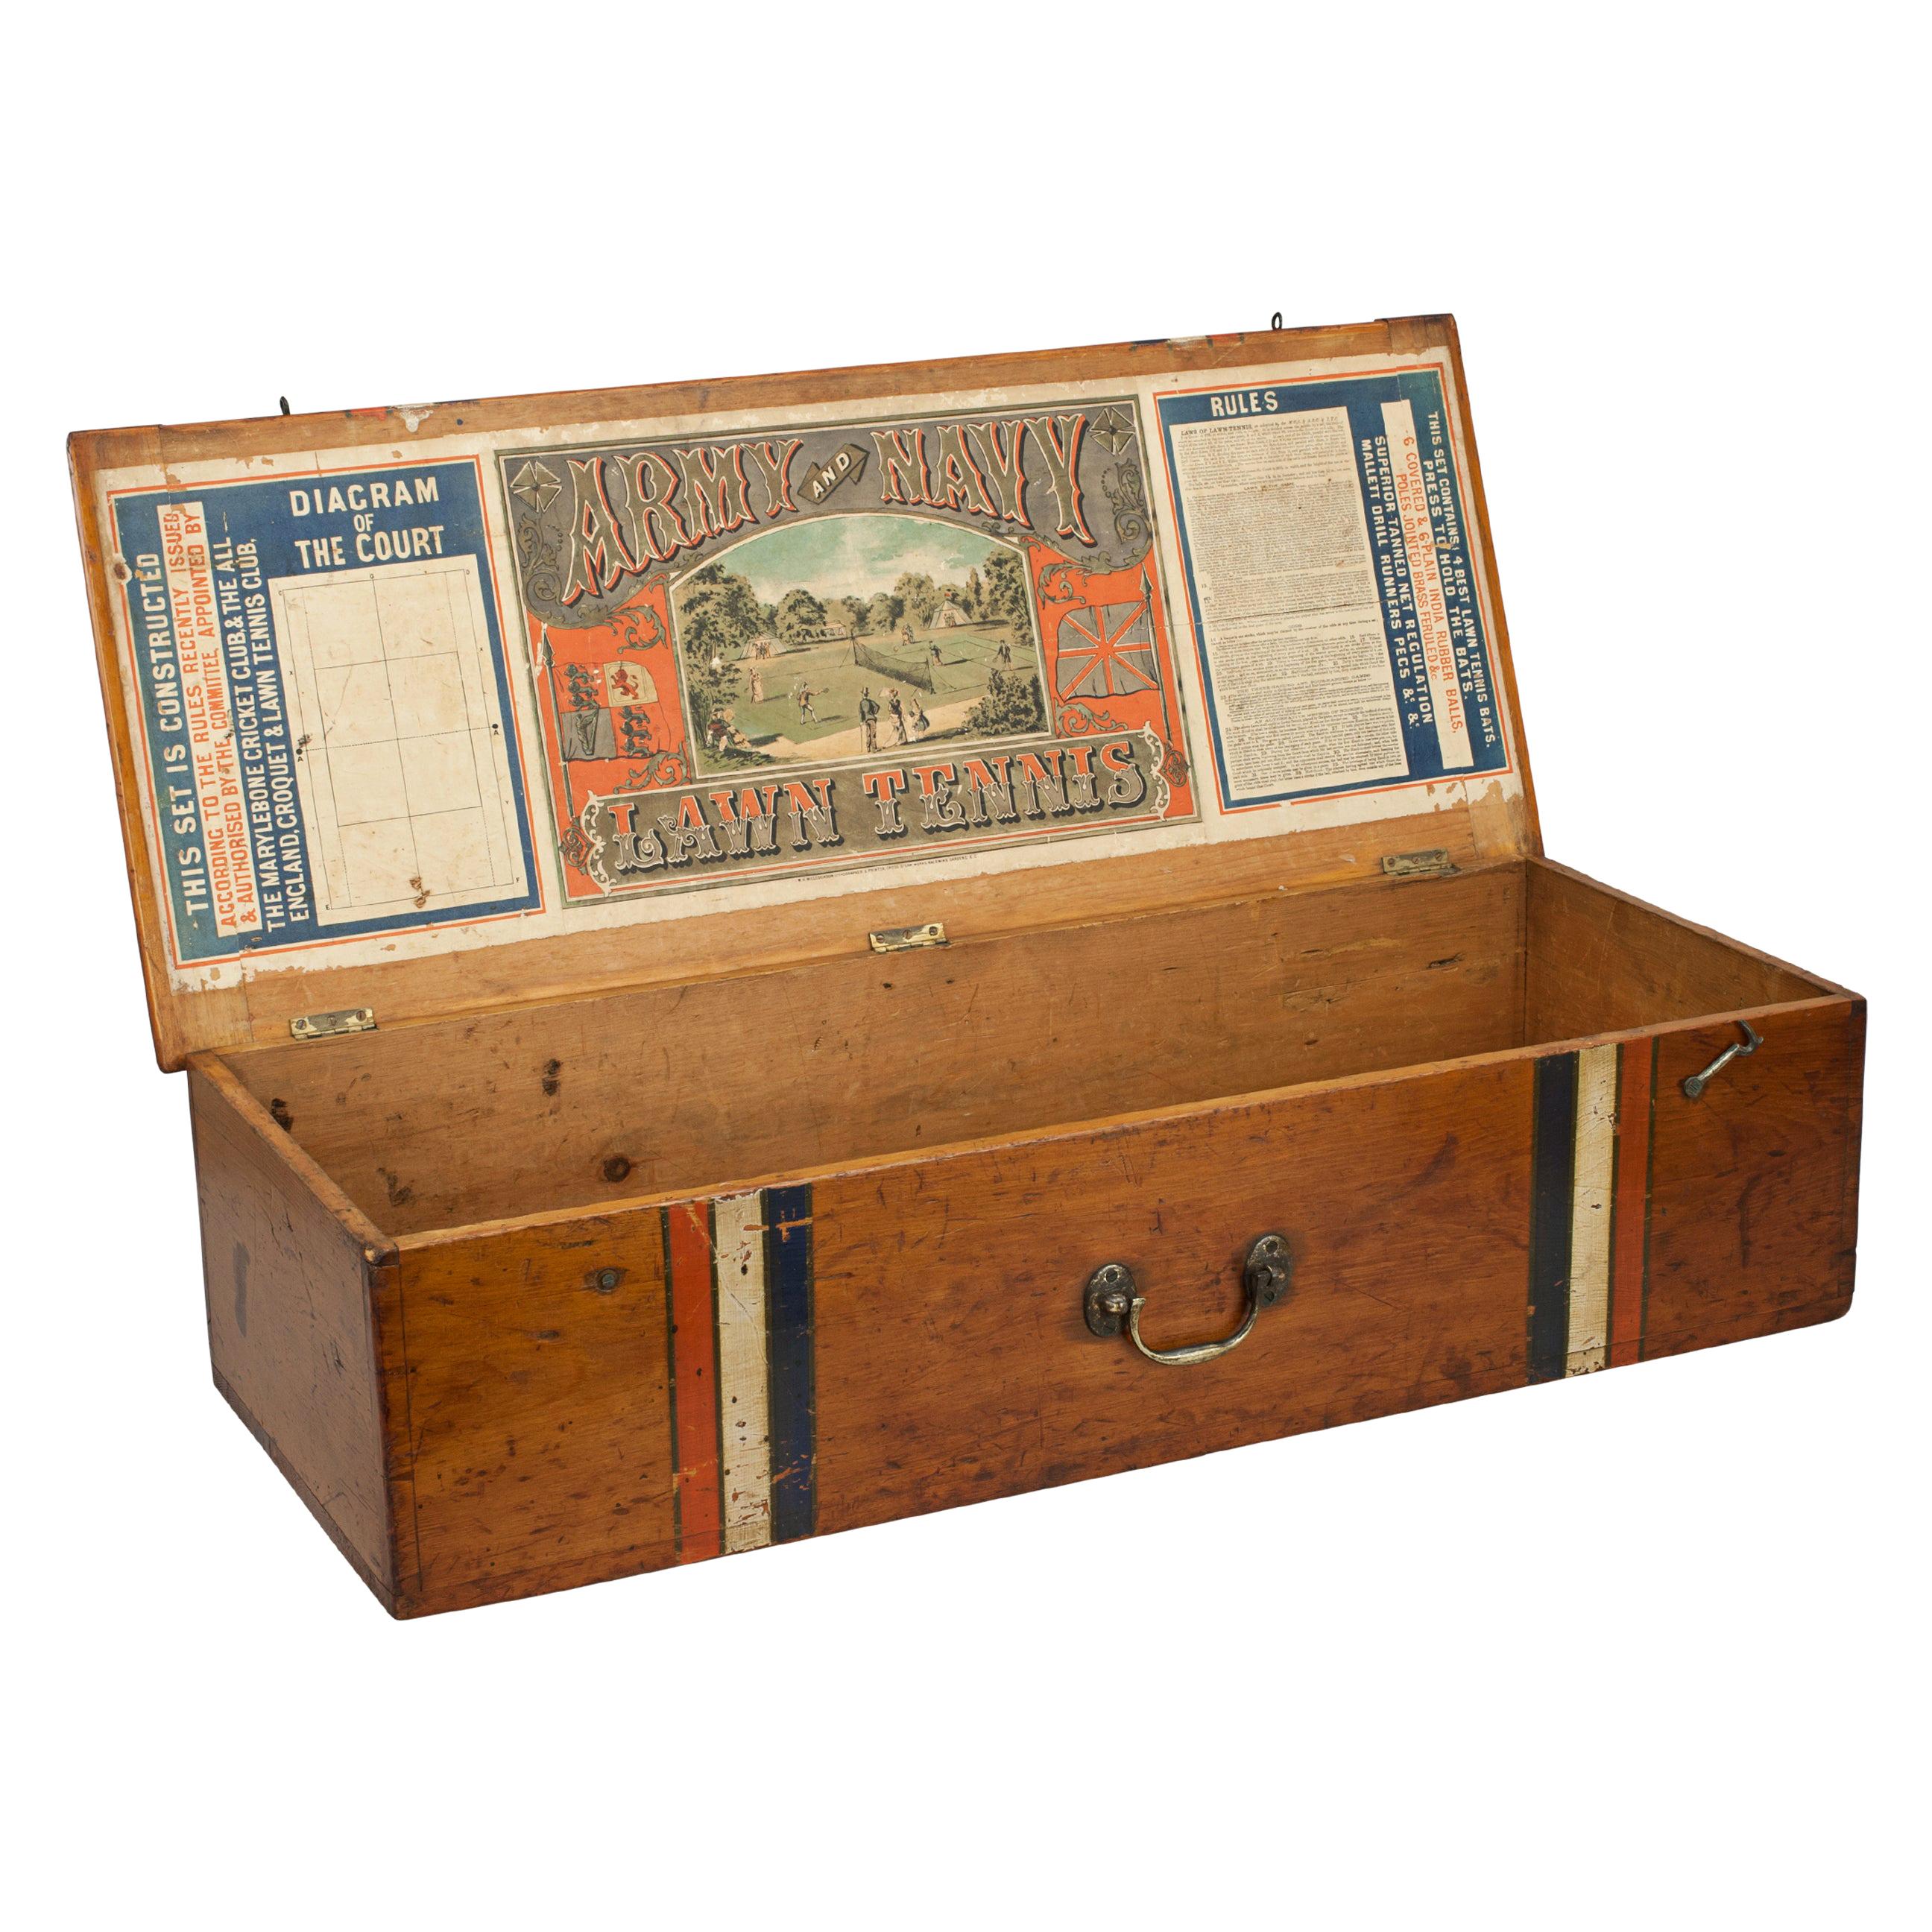 Antique Lawn Tennis Box with Poster, Army and Navy, 1870, s